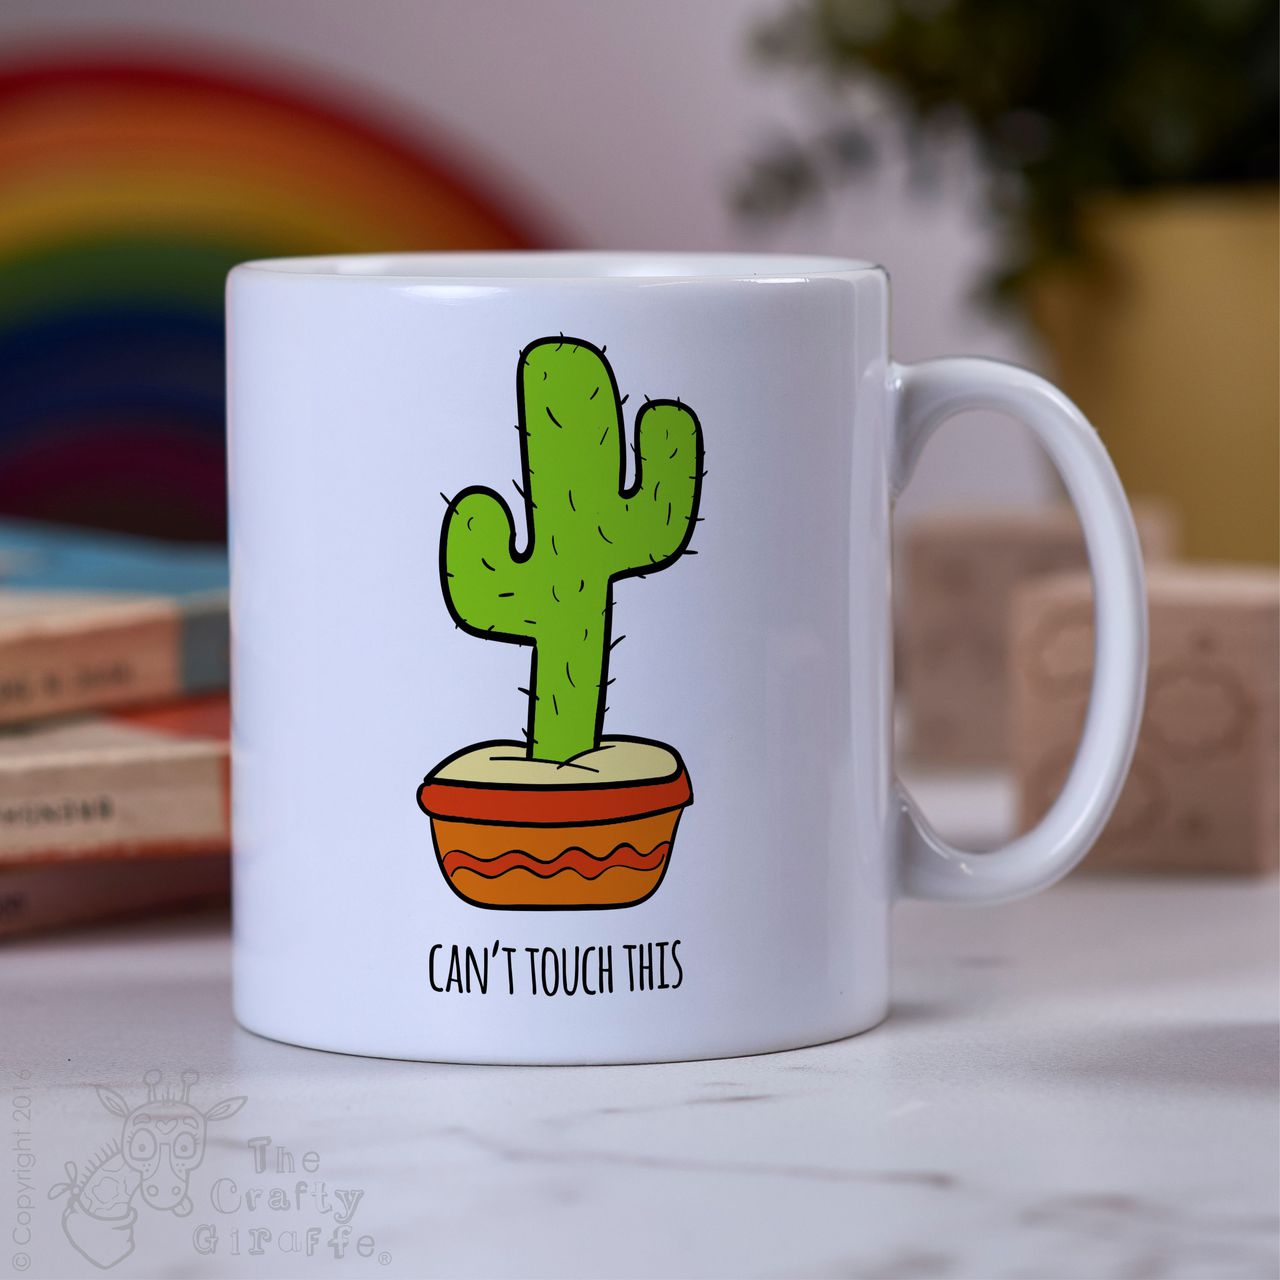 Can’t touch this Mug